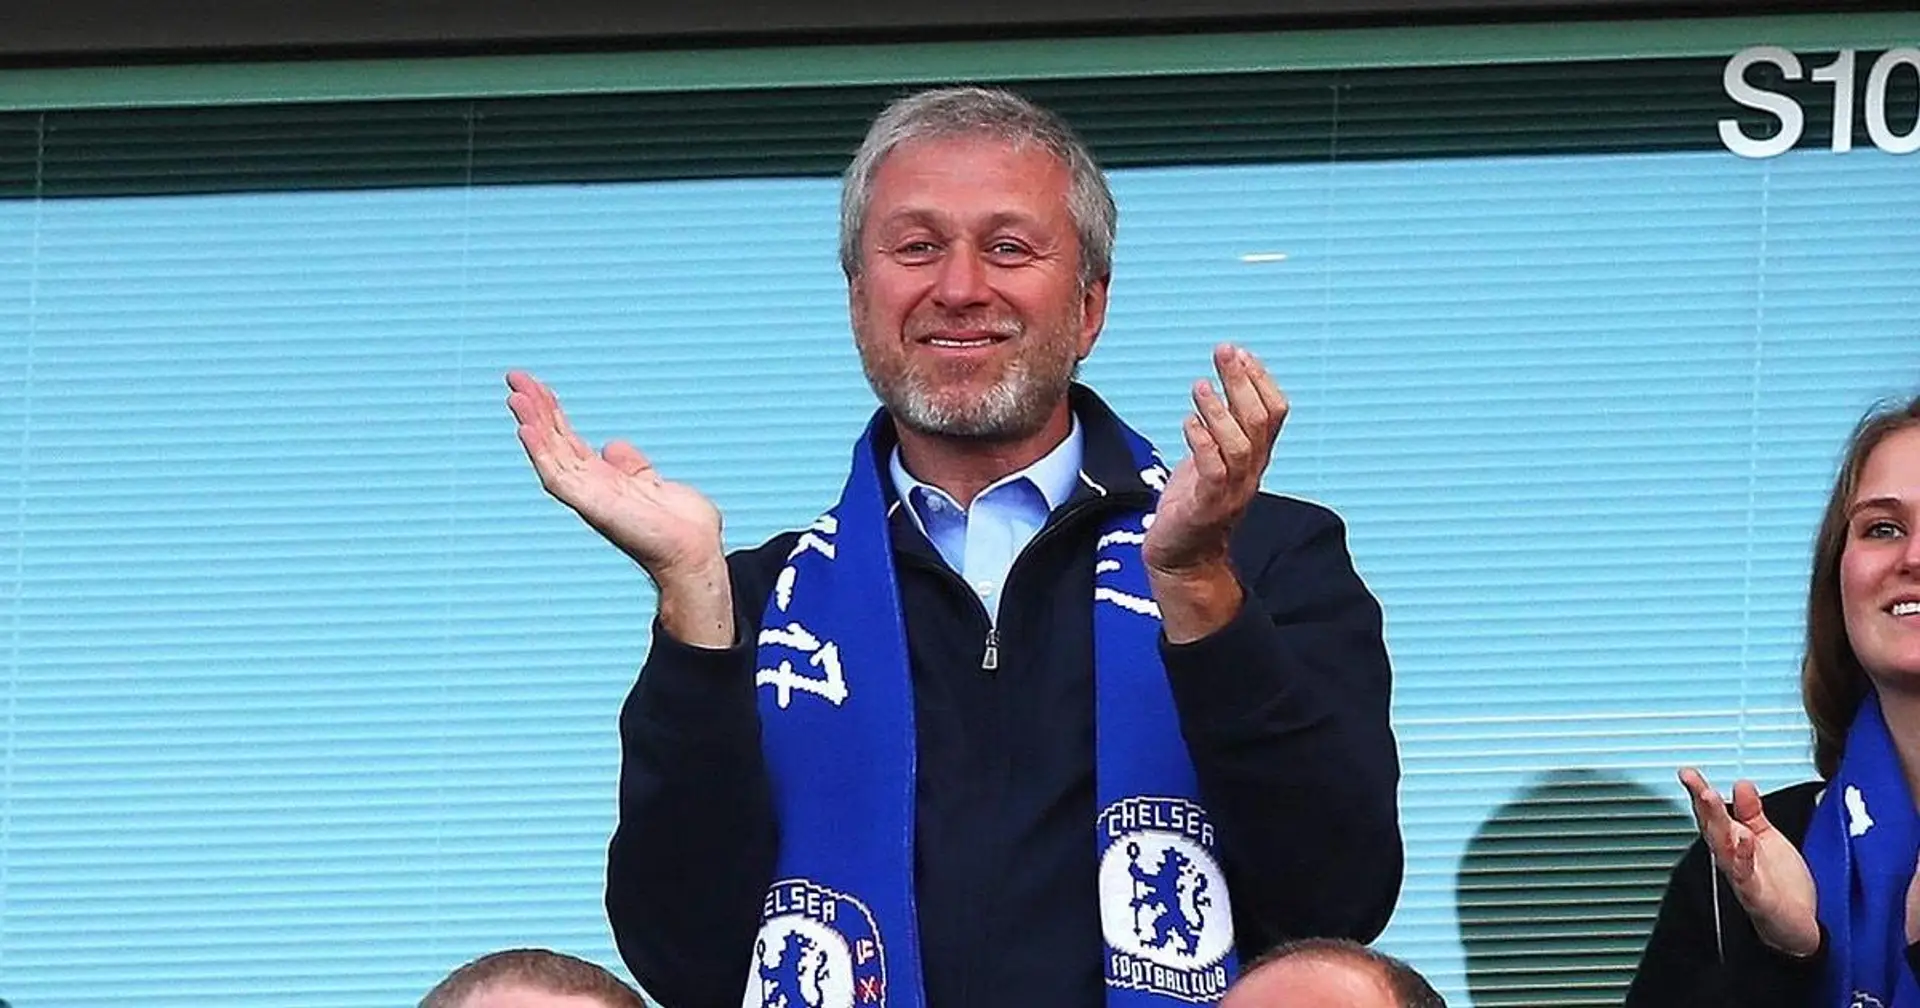 Roman Abramovich 'donated more money than any other living Russian' – looking into some of his charity